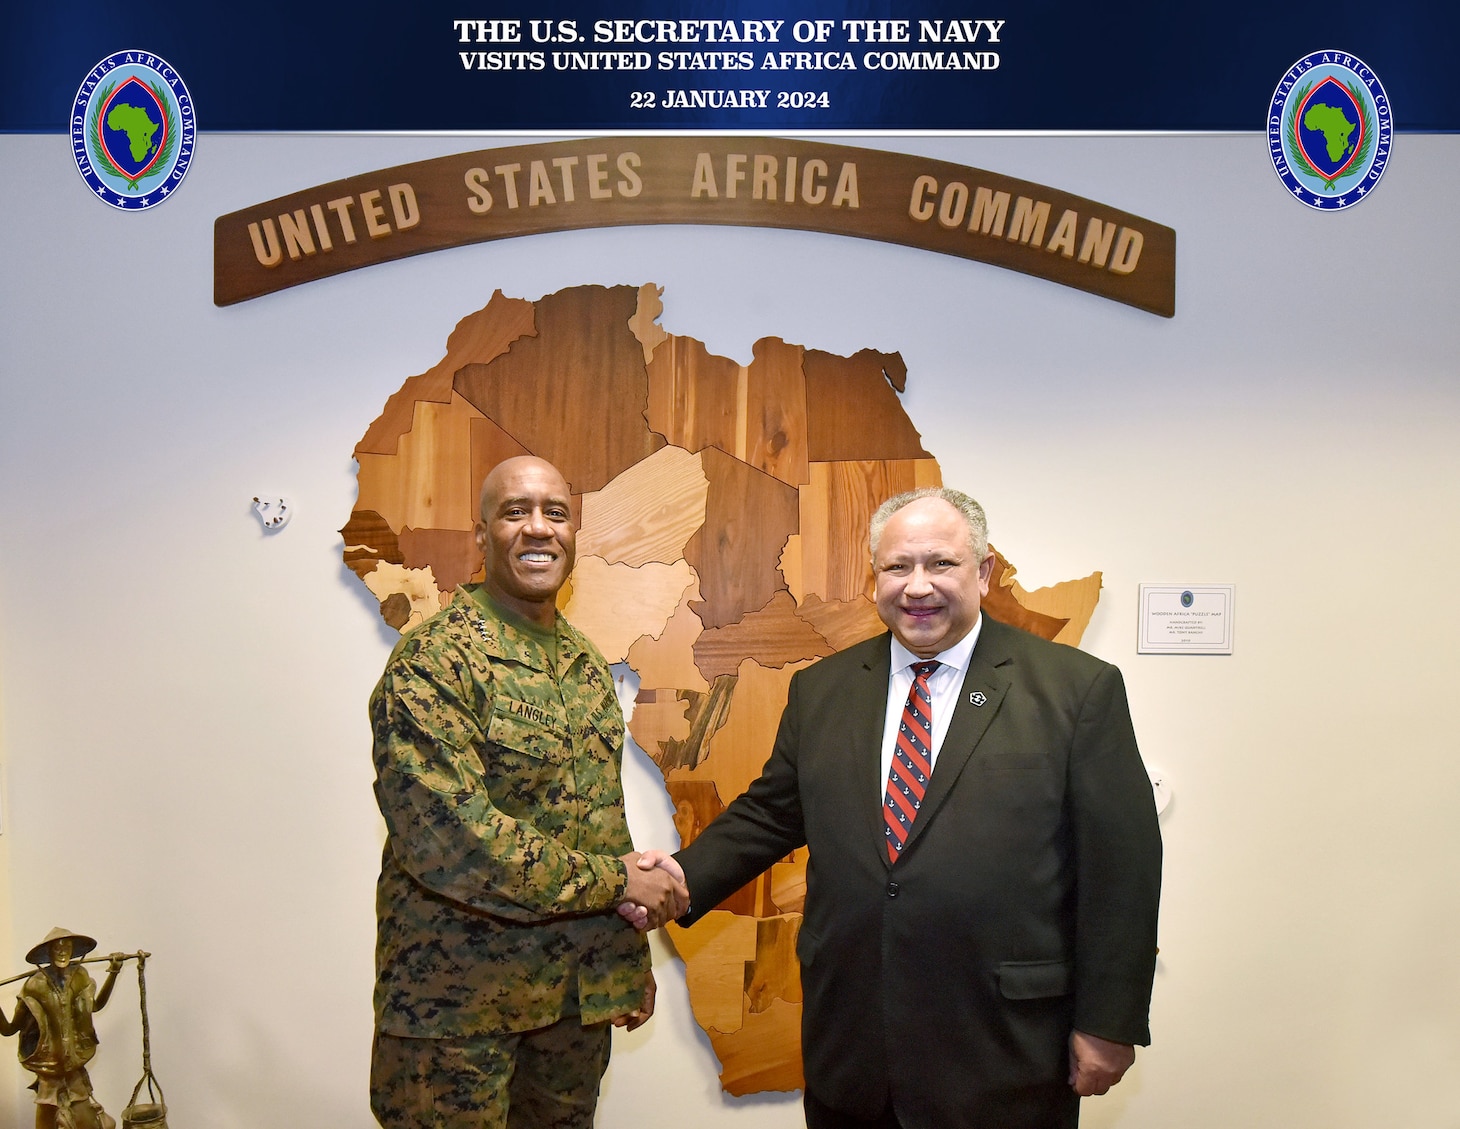 Secretary of the Navy Carlos Del Toro meets with U.S. Marine Corps Gen. Michael E. Langley, the sixth commander of U.S. Africa Command (AFRICOM) in Stuttgart, Germany, Jan. 22. The leaders discussed AFRICOM’s efforts to counter transnational threats and malign actors, strengthen security forces, and support partners in Africa using a 3D approach: Diplomacy, Development & Defense.